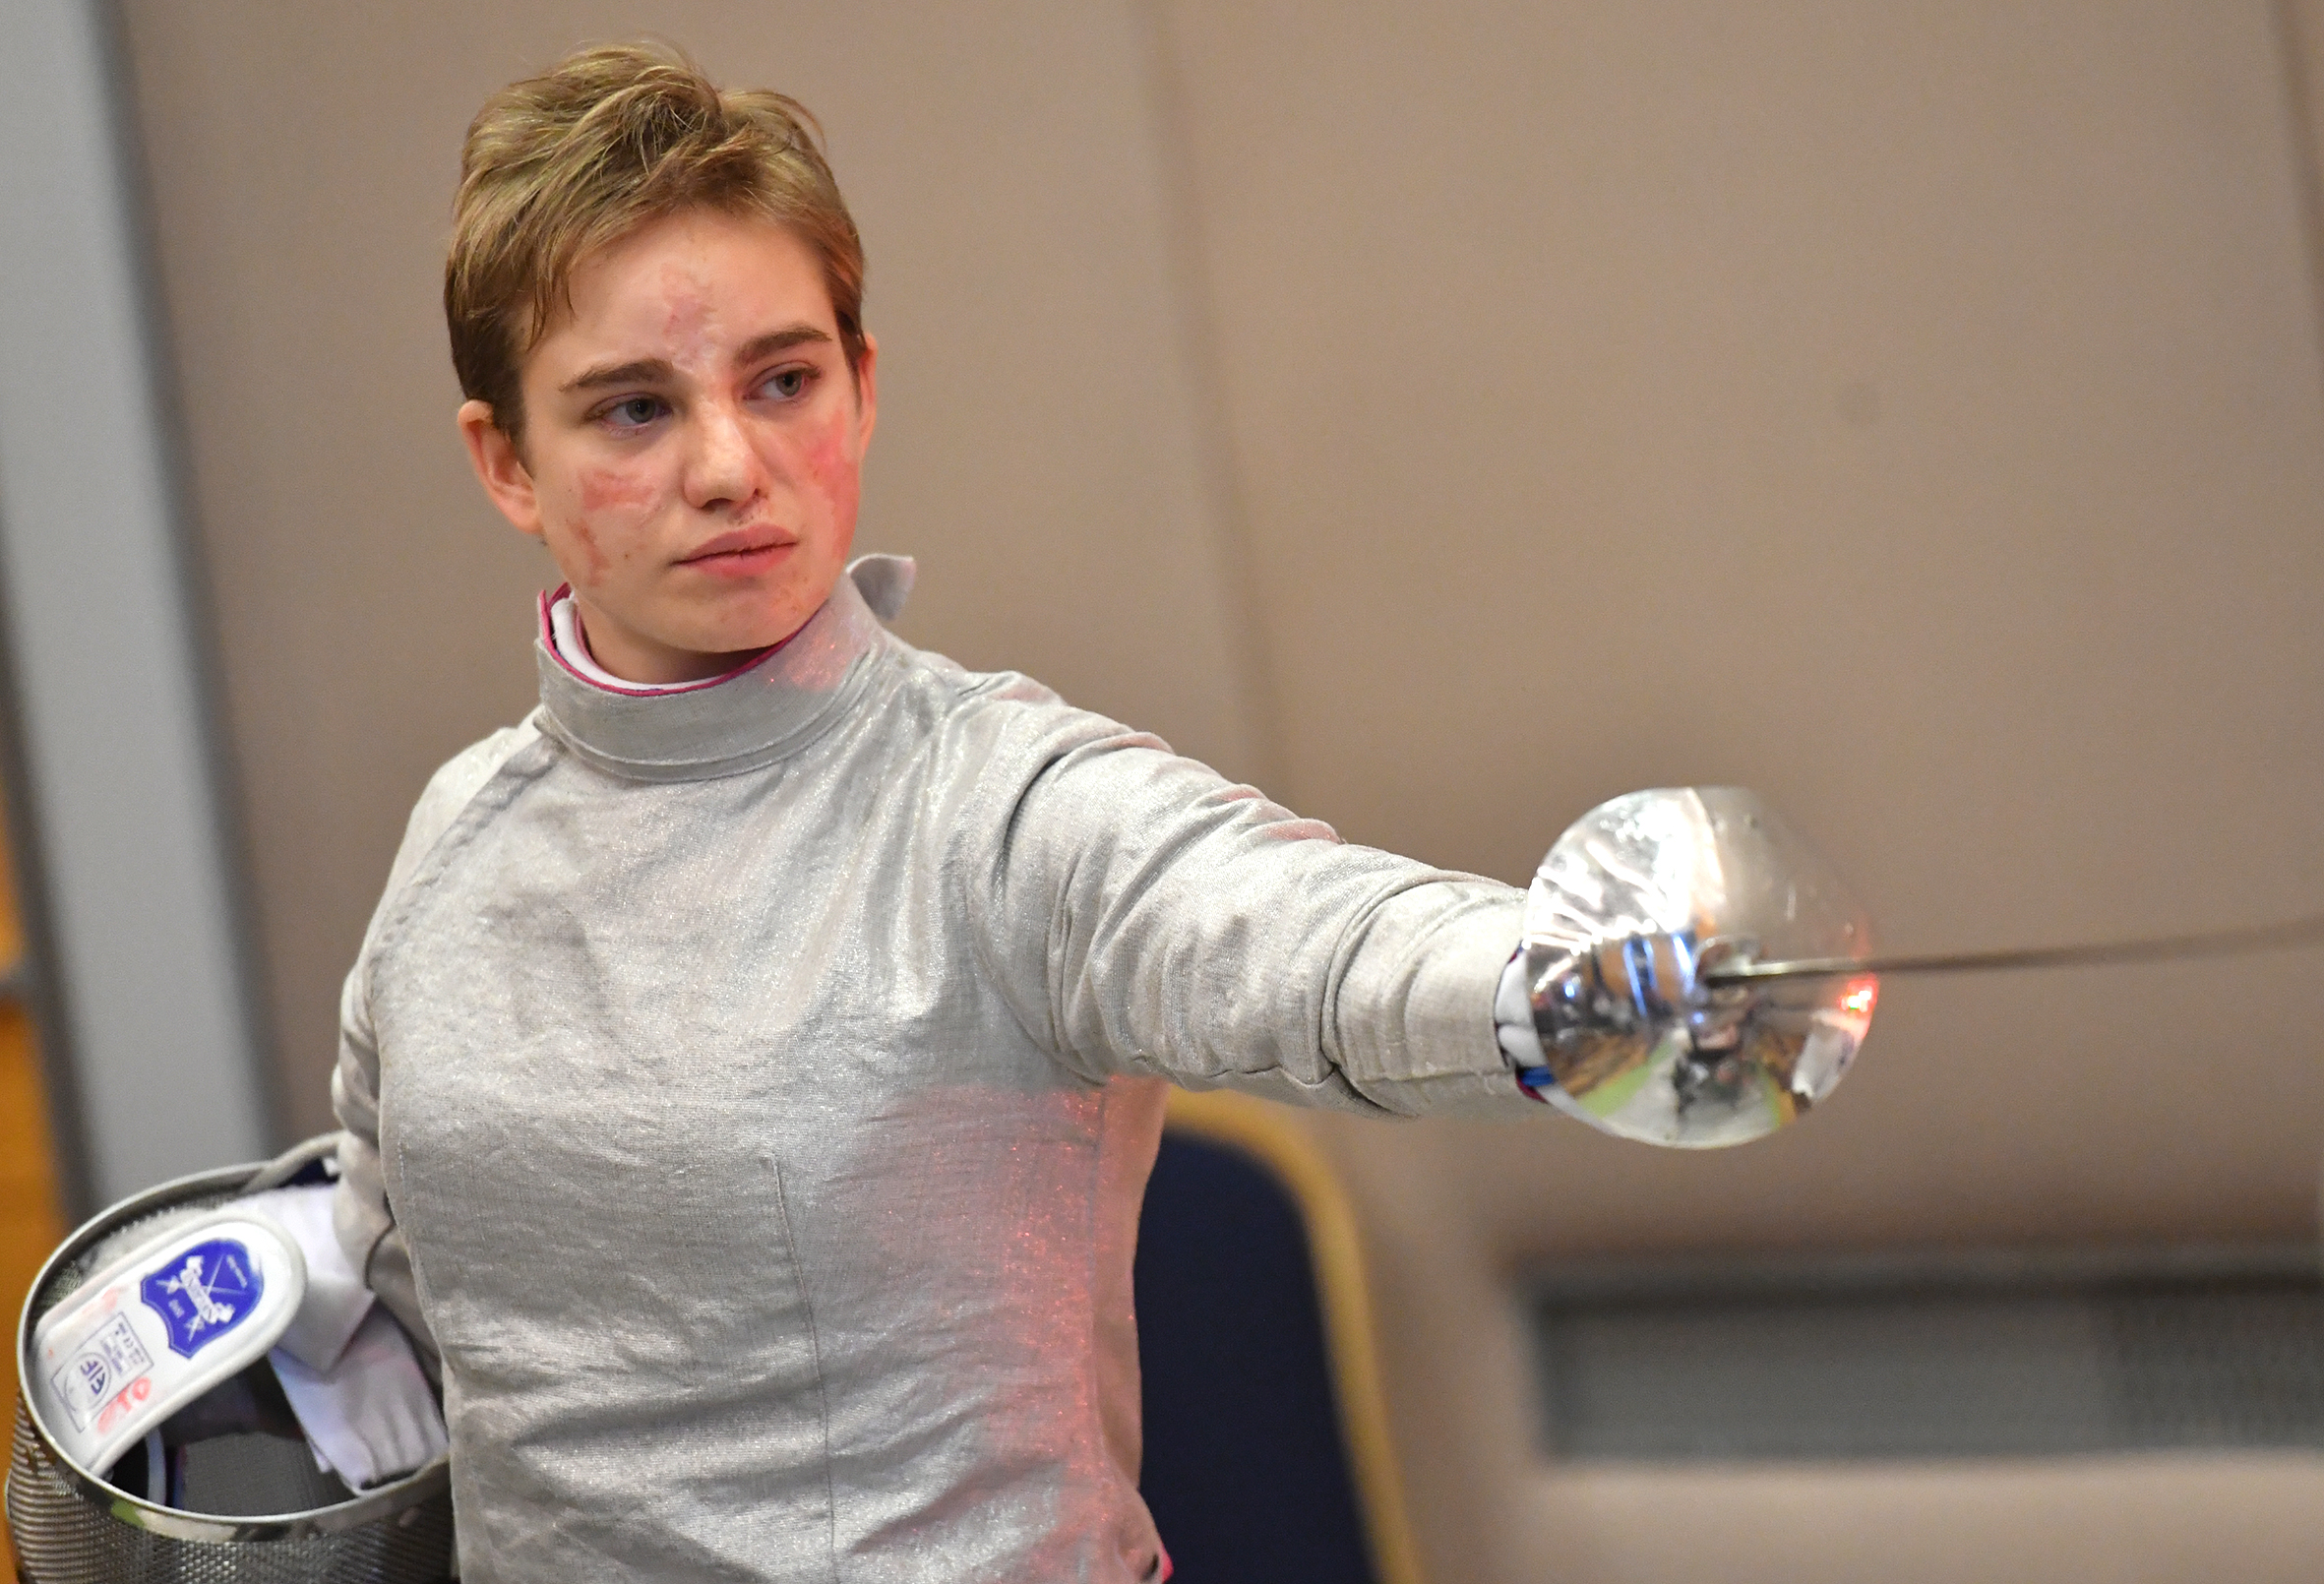 Fencer Beatrice Maria in fencing fear and sword drawn